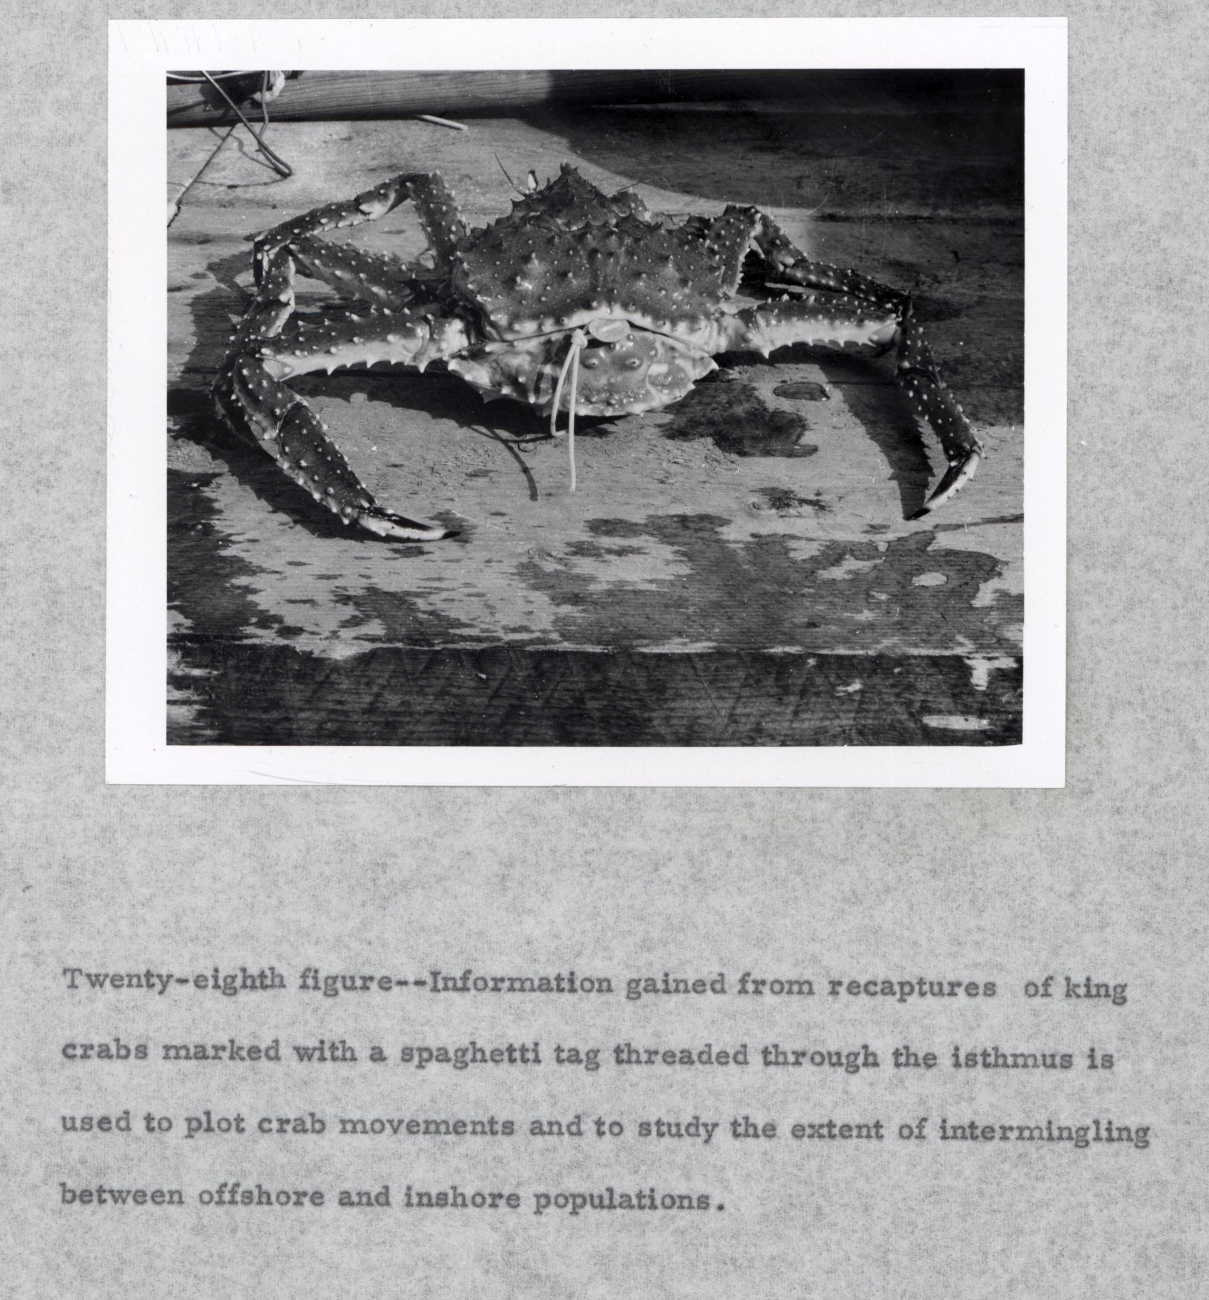 Information gained from recaptures of king crabs marked with a spaghetti tagthreaded through the isthmus is used to plot crab movements and to studythe extent of intermingling between offshore and inshore populations